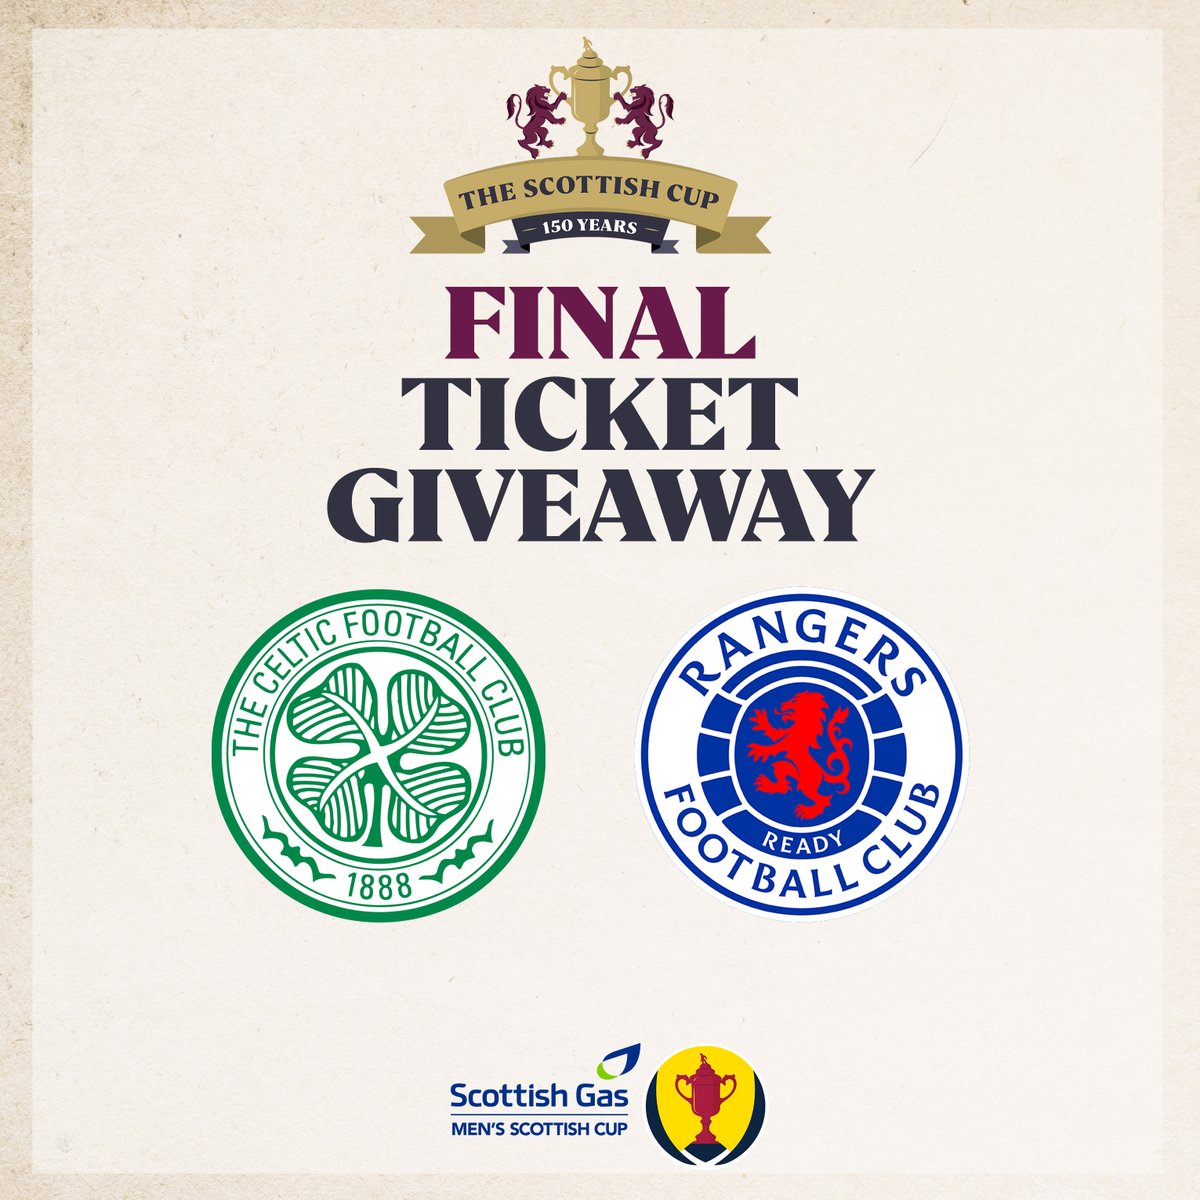 🎟️ Final Ticket Giveaway 🎟️

We have a pair of tickets to giveaway for each end at this weekend's @scottishgas Men's Scottish Cup Final 🏆  

To enter:
❤️ Like and RT this post
➕ Follow @ScottishCup
⤵️ Reply with which end you would like tickets for

#ScottishCup